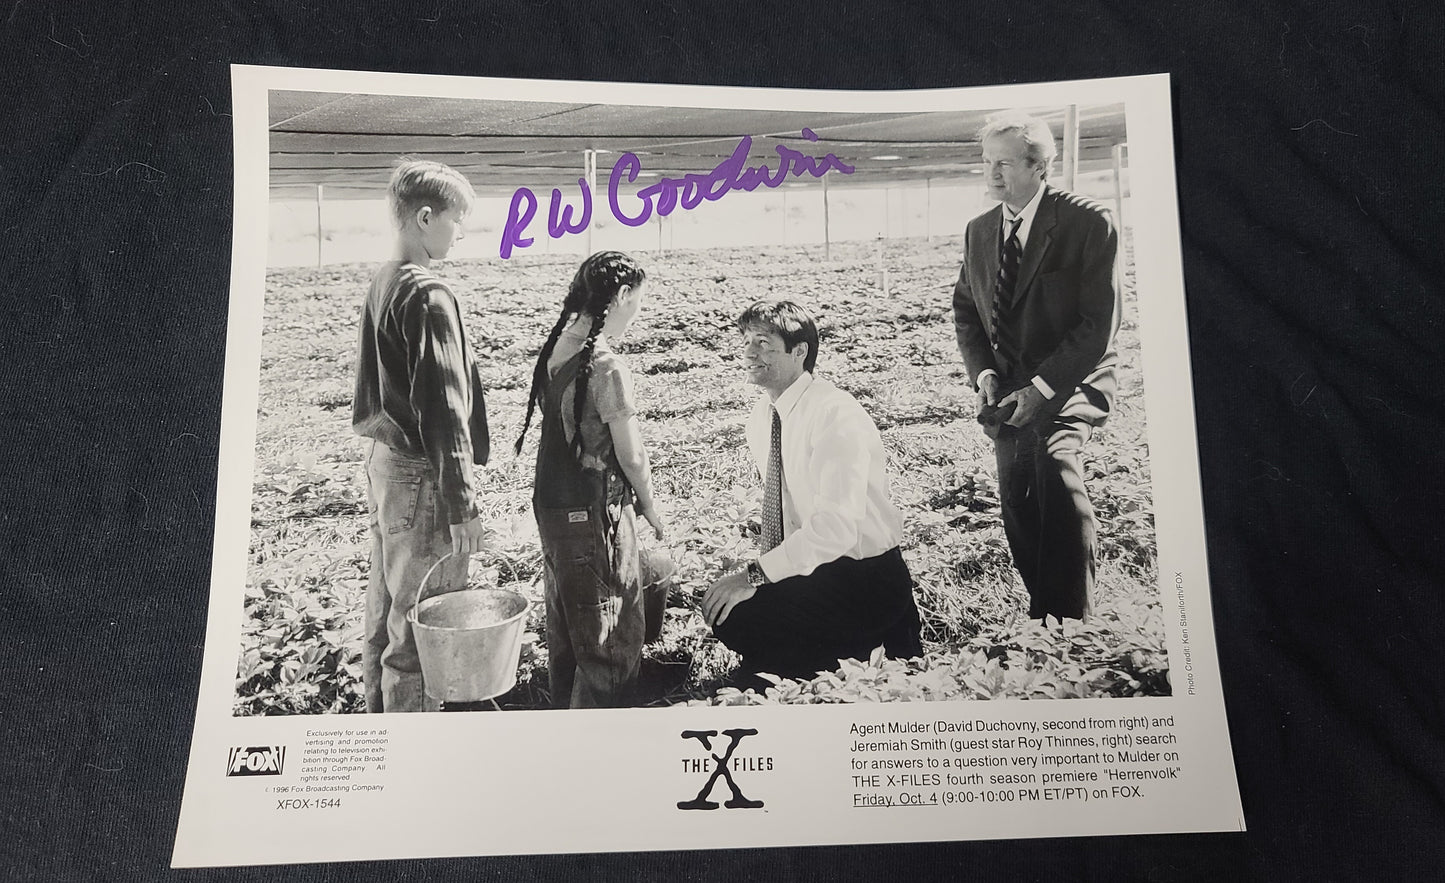 Press Photo autographed by R. W. Goodwin; Producer, Director and Writer for The X-Files. #6